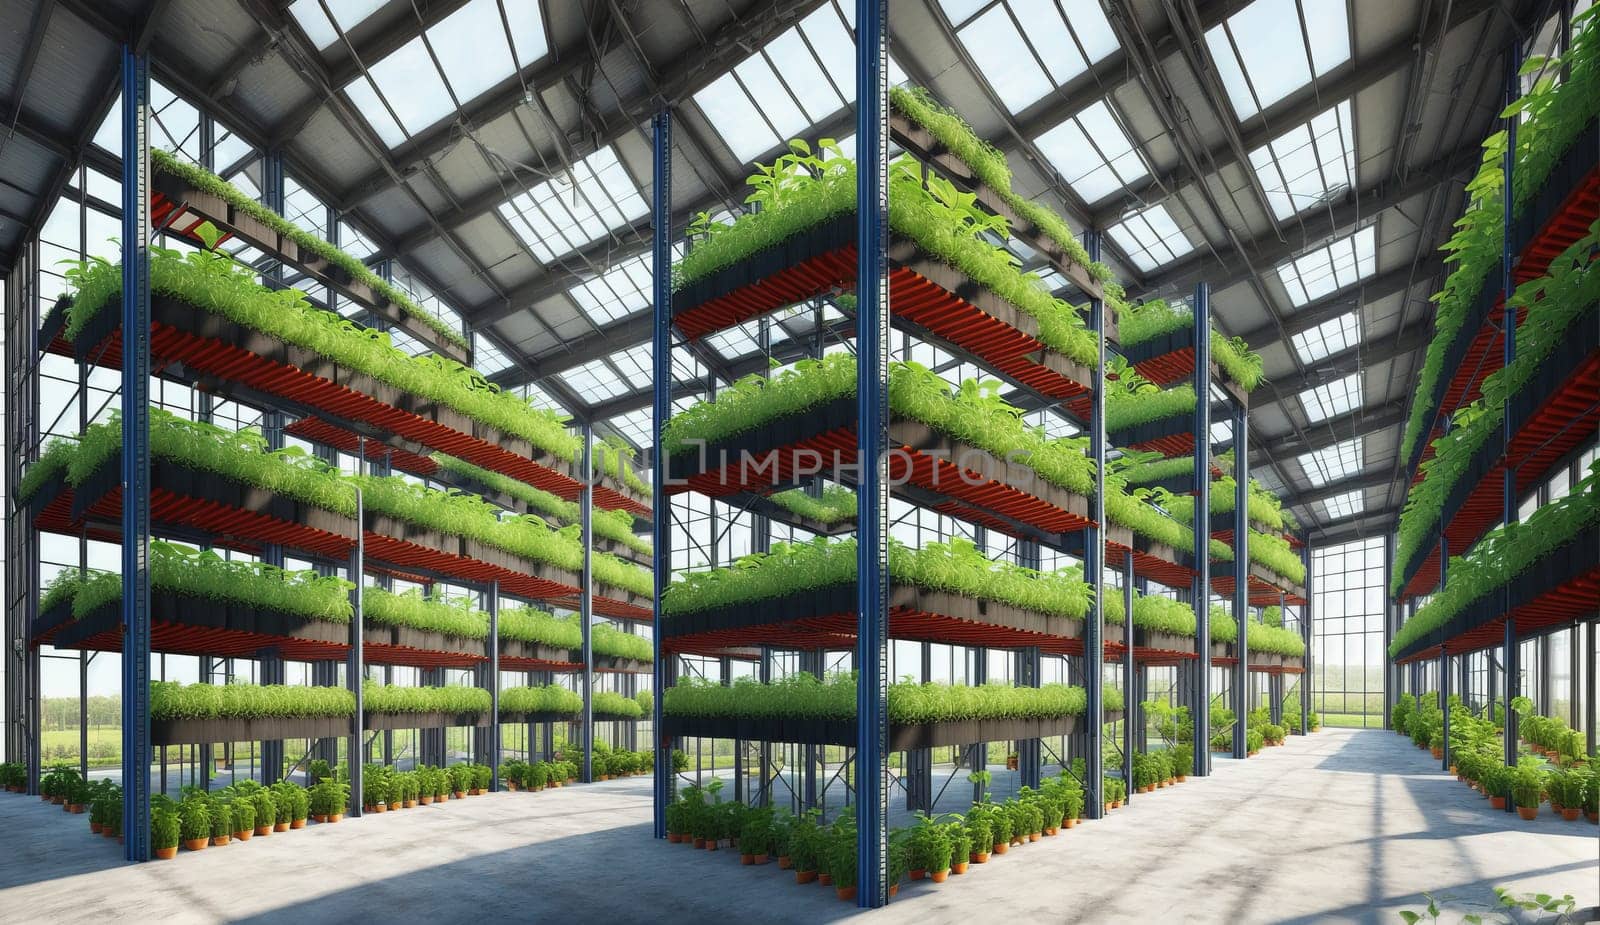 Building filled with plantfilled shelves, showcasing an urban design concept by DCStudio